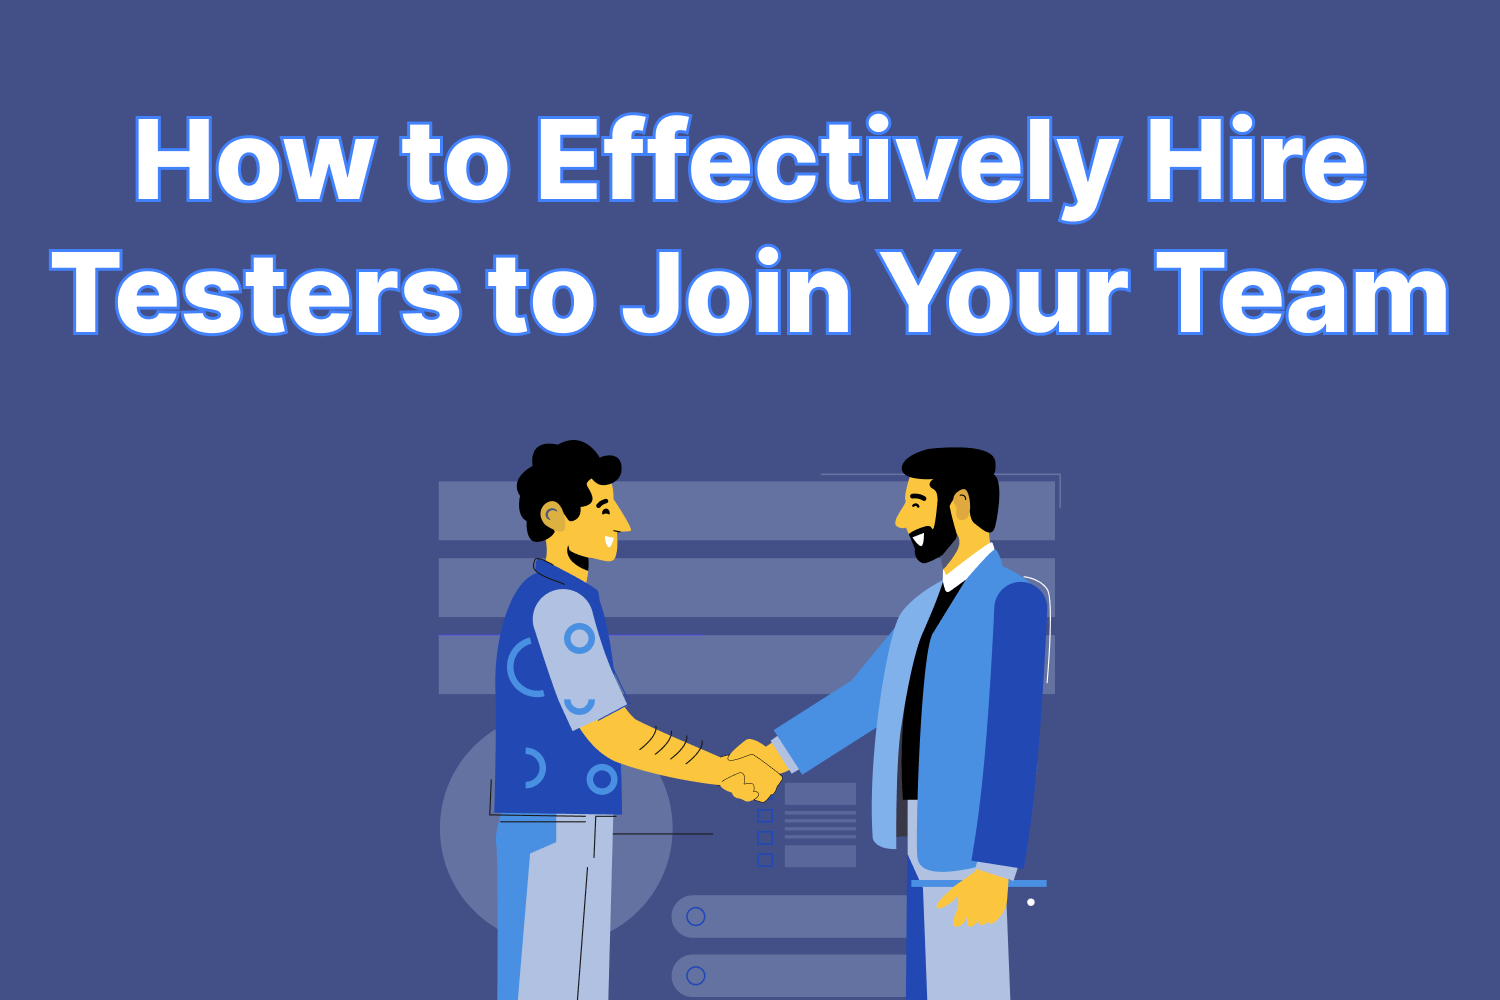 How to Effectively Hire Testers to Join Your Team